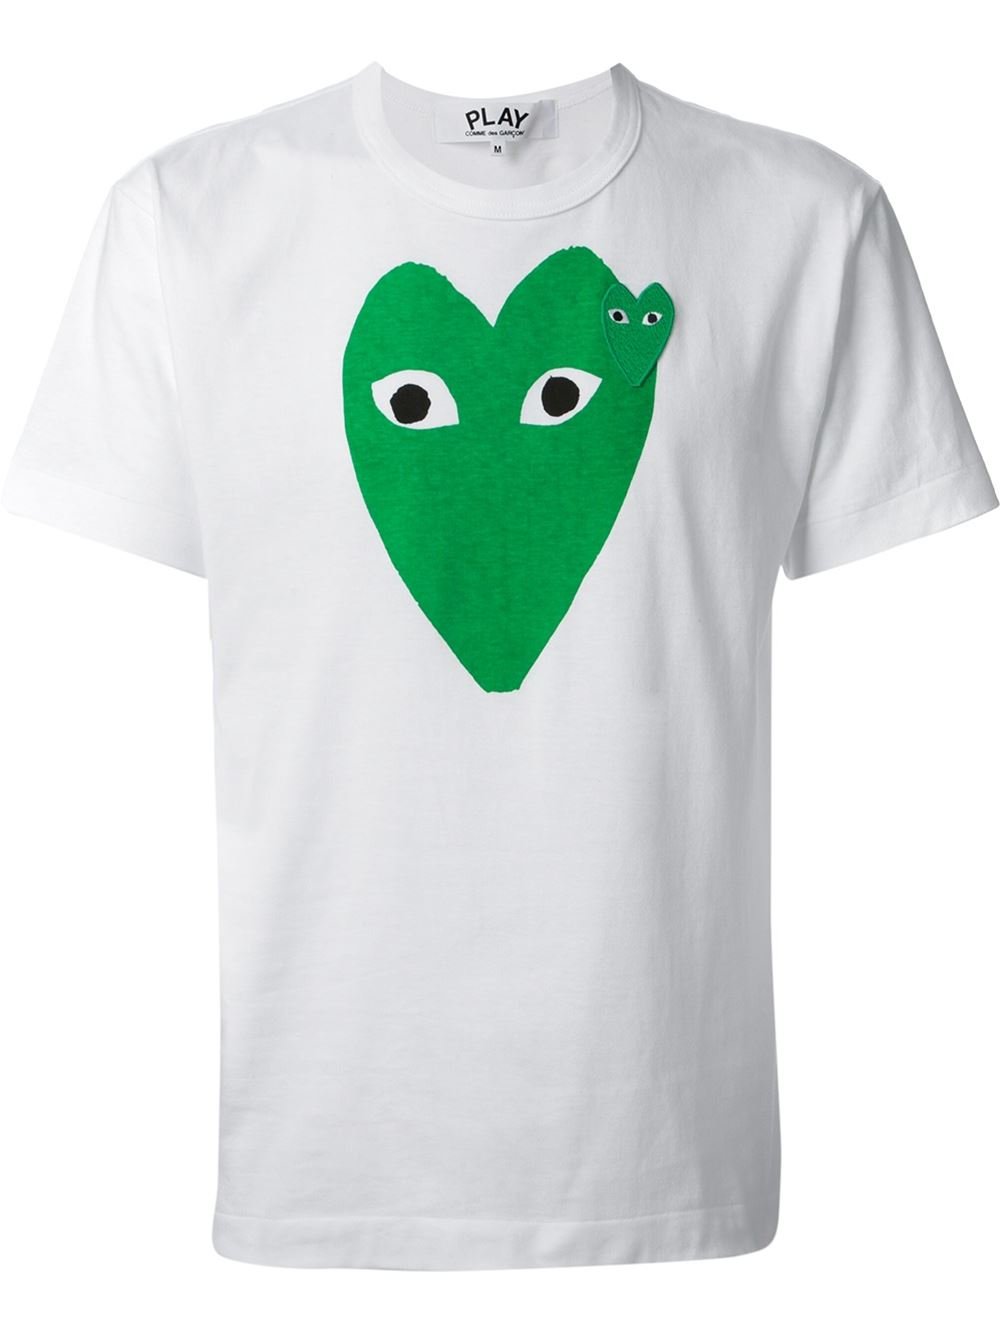 Play comme des garçons Printed T-shirt in White for Men | Lyst